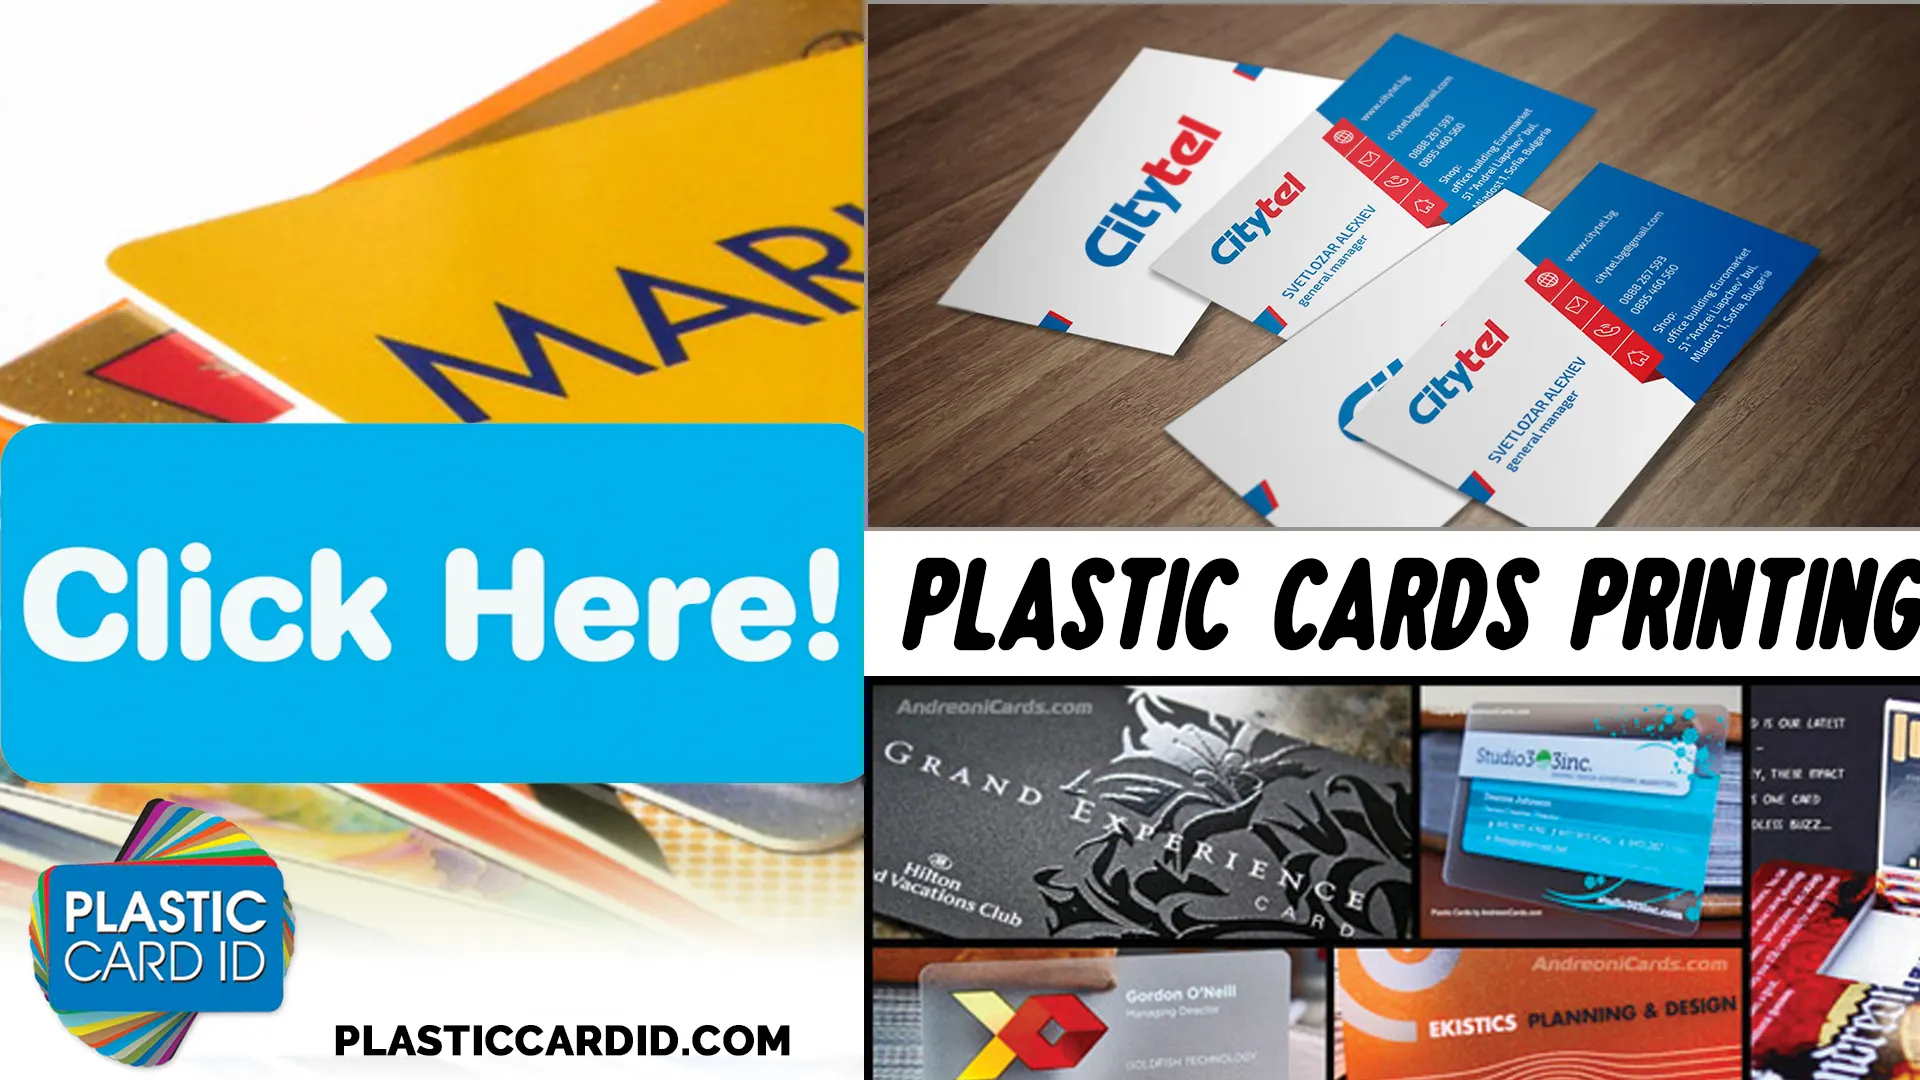 Plastic Card ID
's Innovative Steps Towards Sustainable Solutions